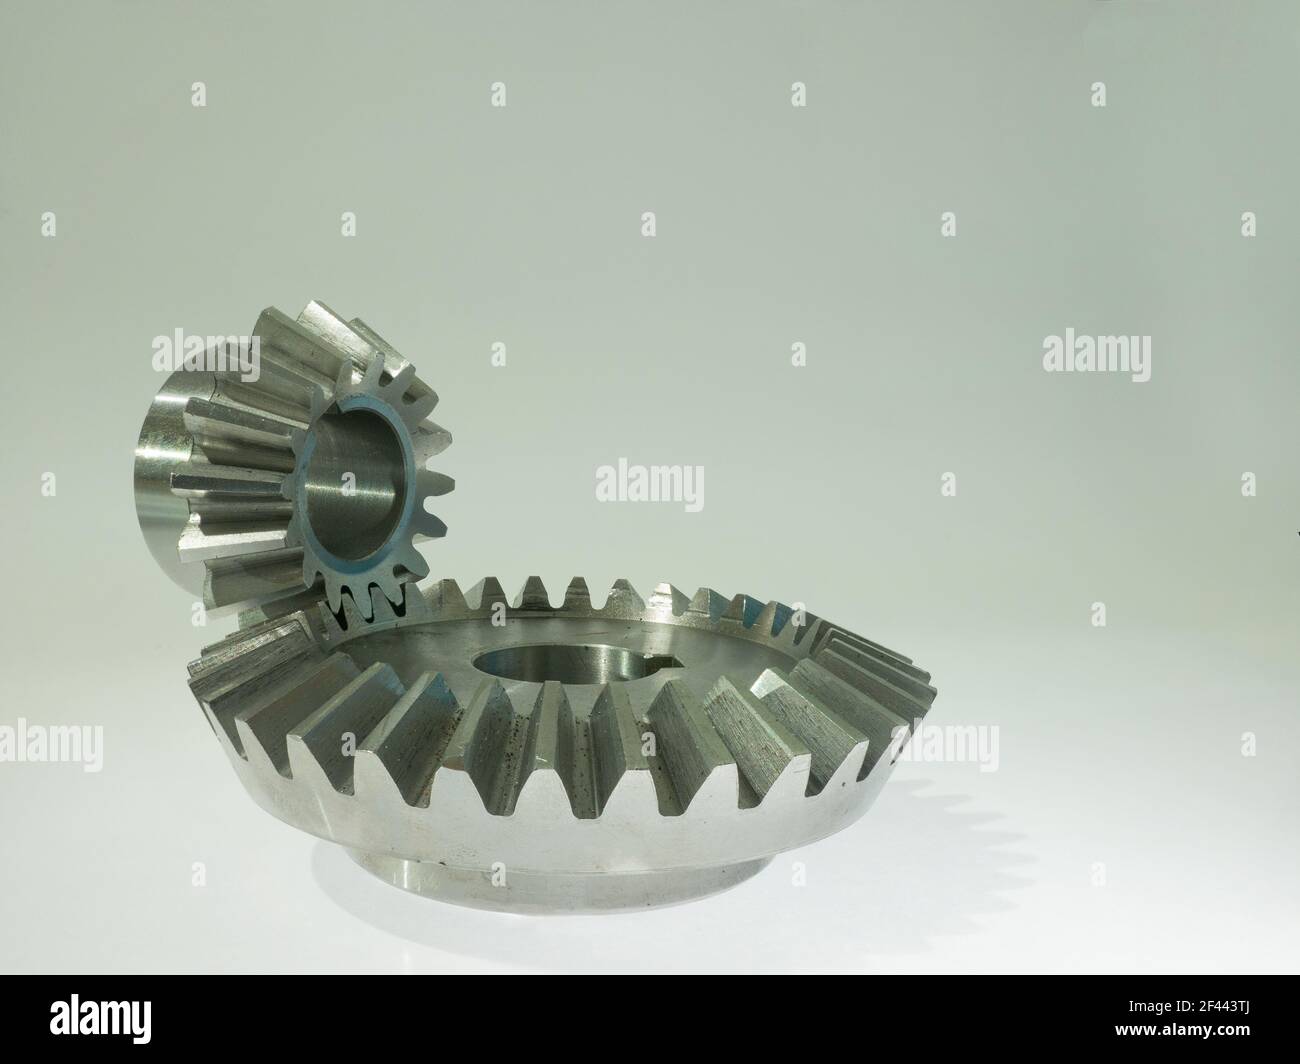 bevel gears: cone-shaped gear which transmits power between two intersecting axes (copy space) Stock Photo